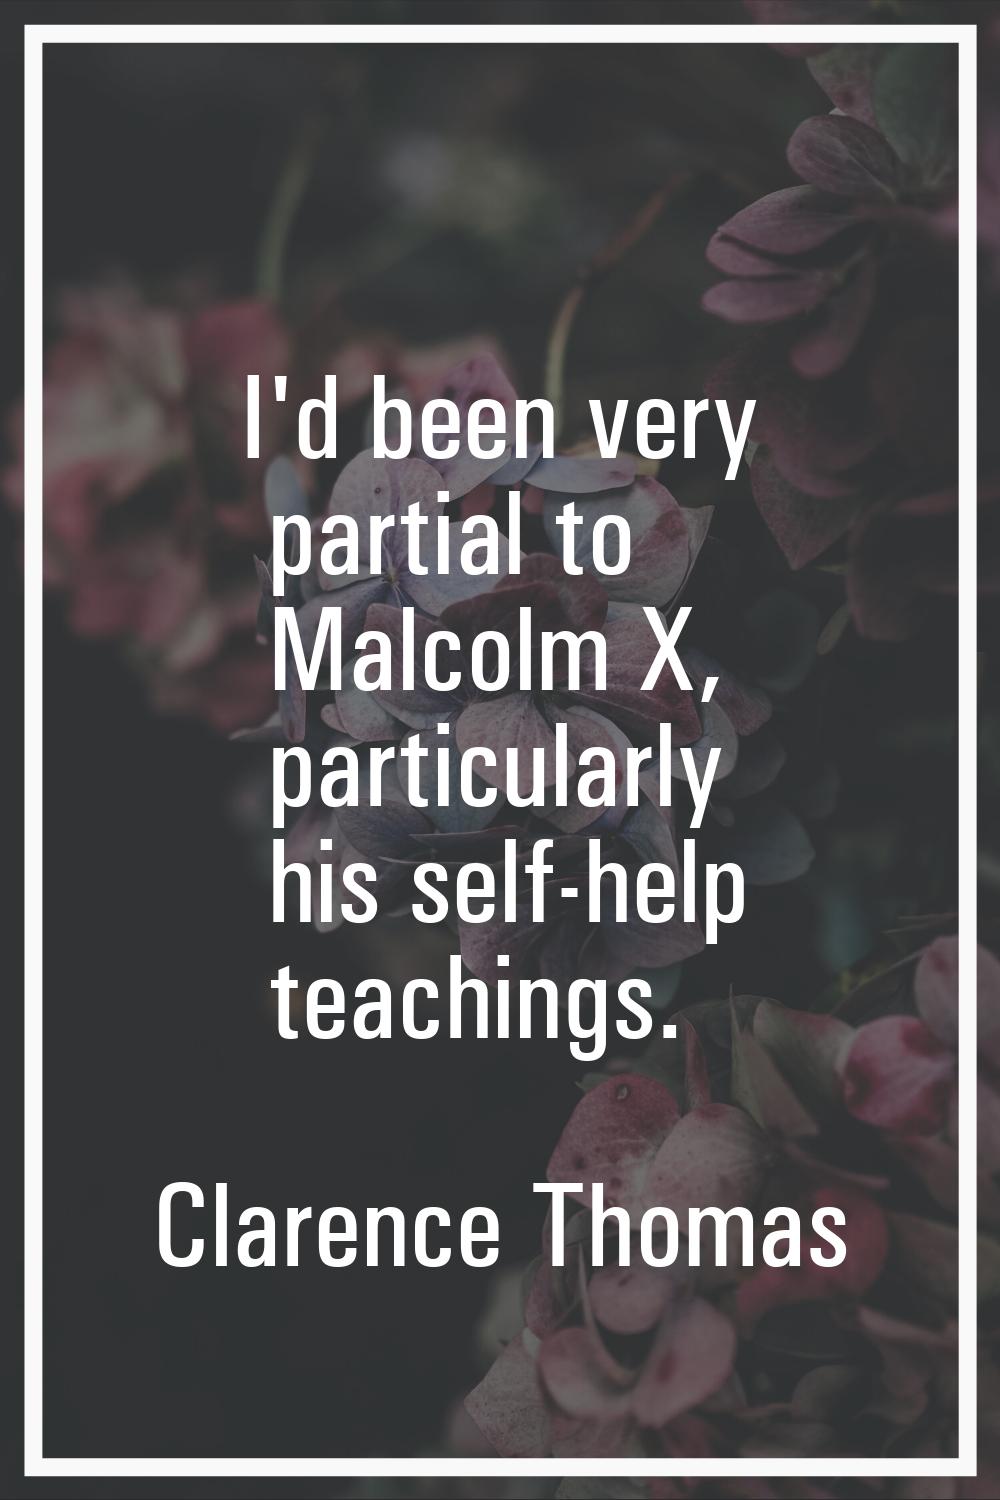 I'd been very partial to Malcolm X, particularly his self-help teachings.